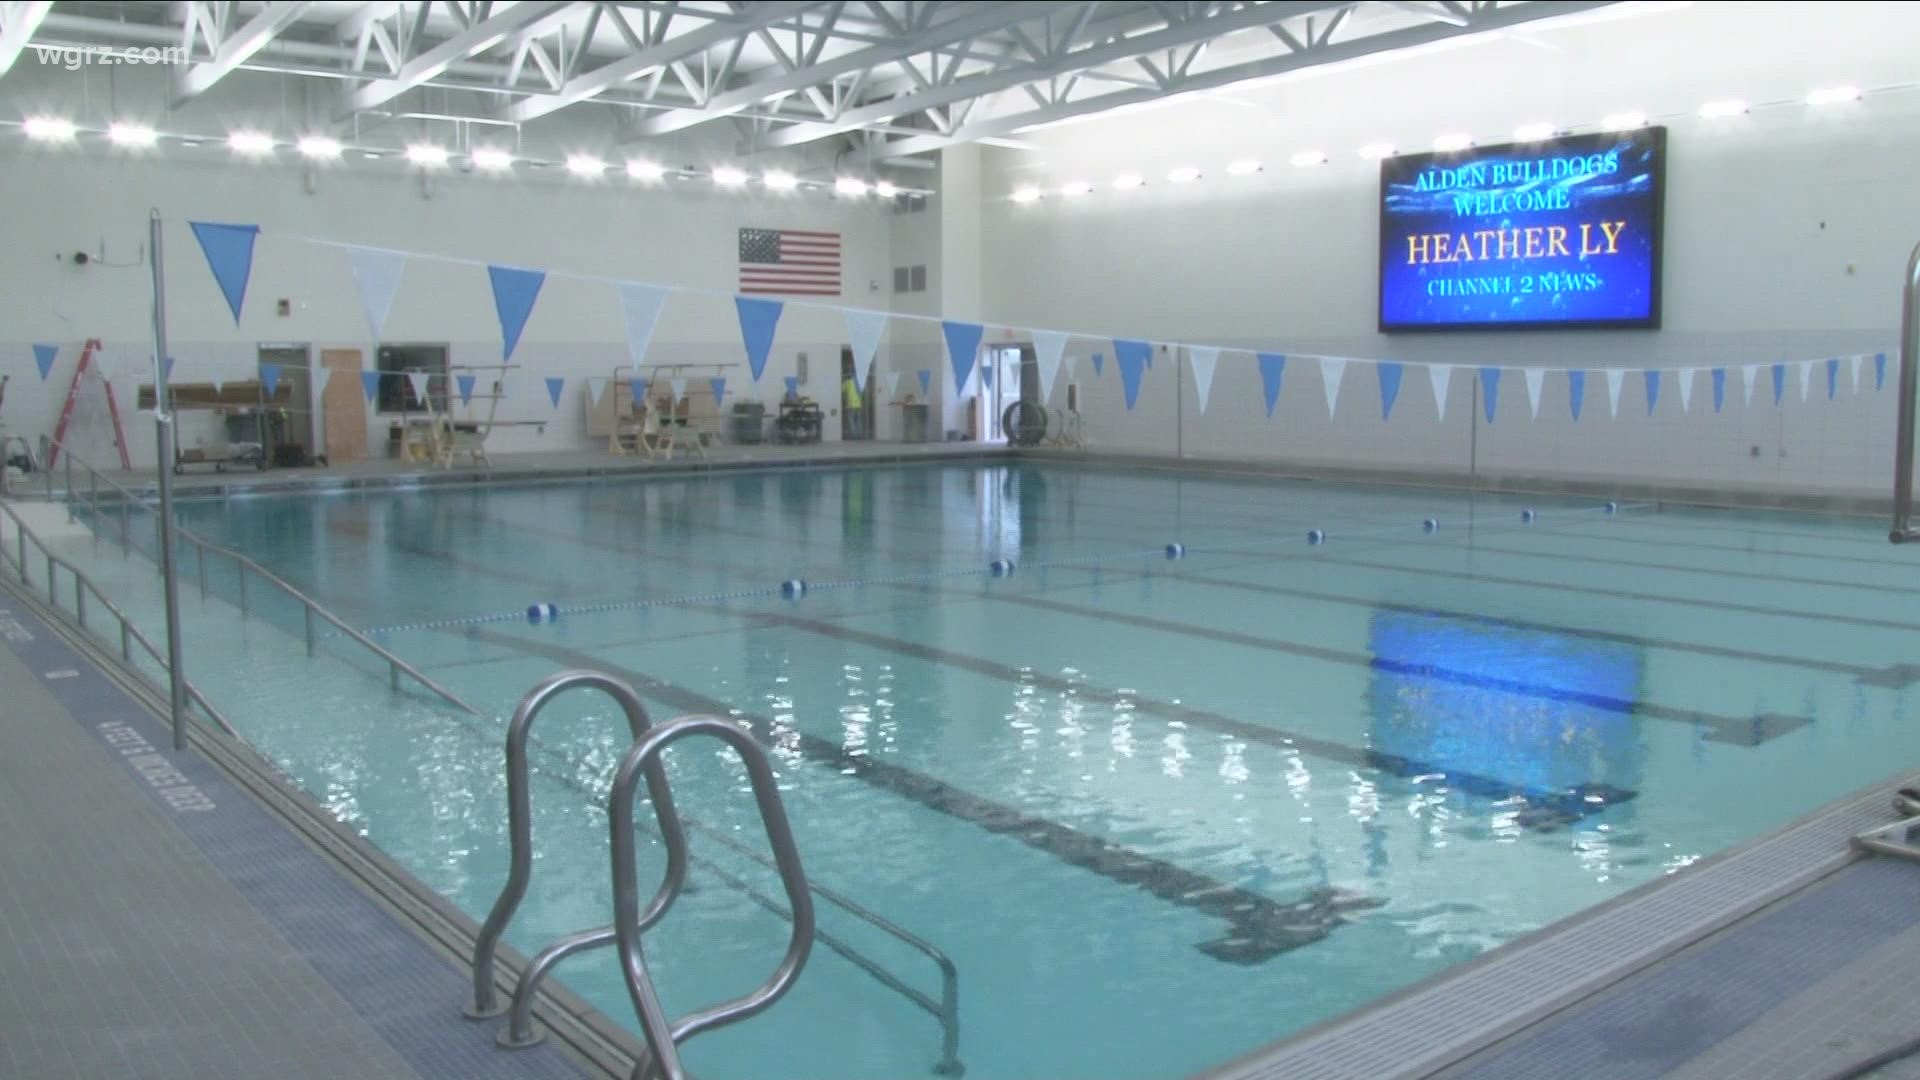 Students will get to test out the new pool on August 23, and the grand opening is set for September 7.